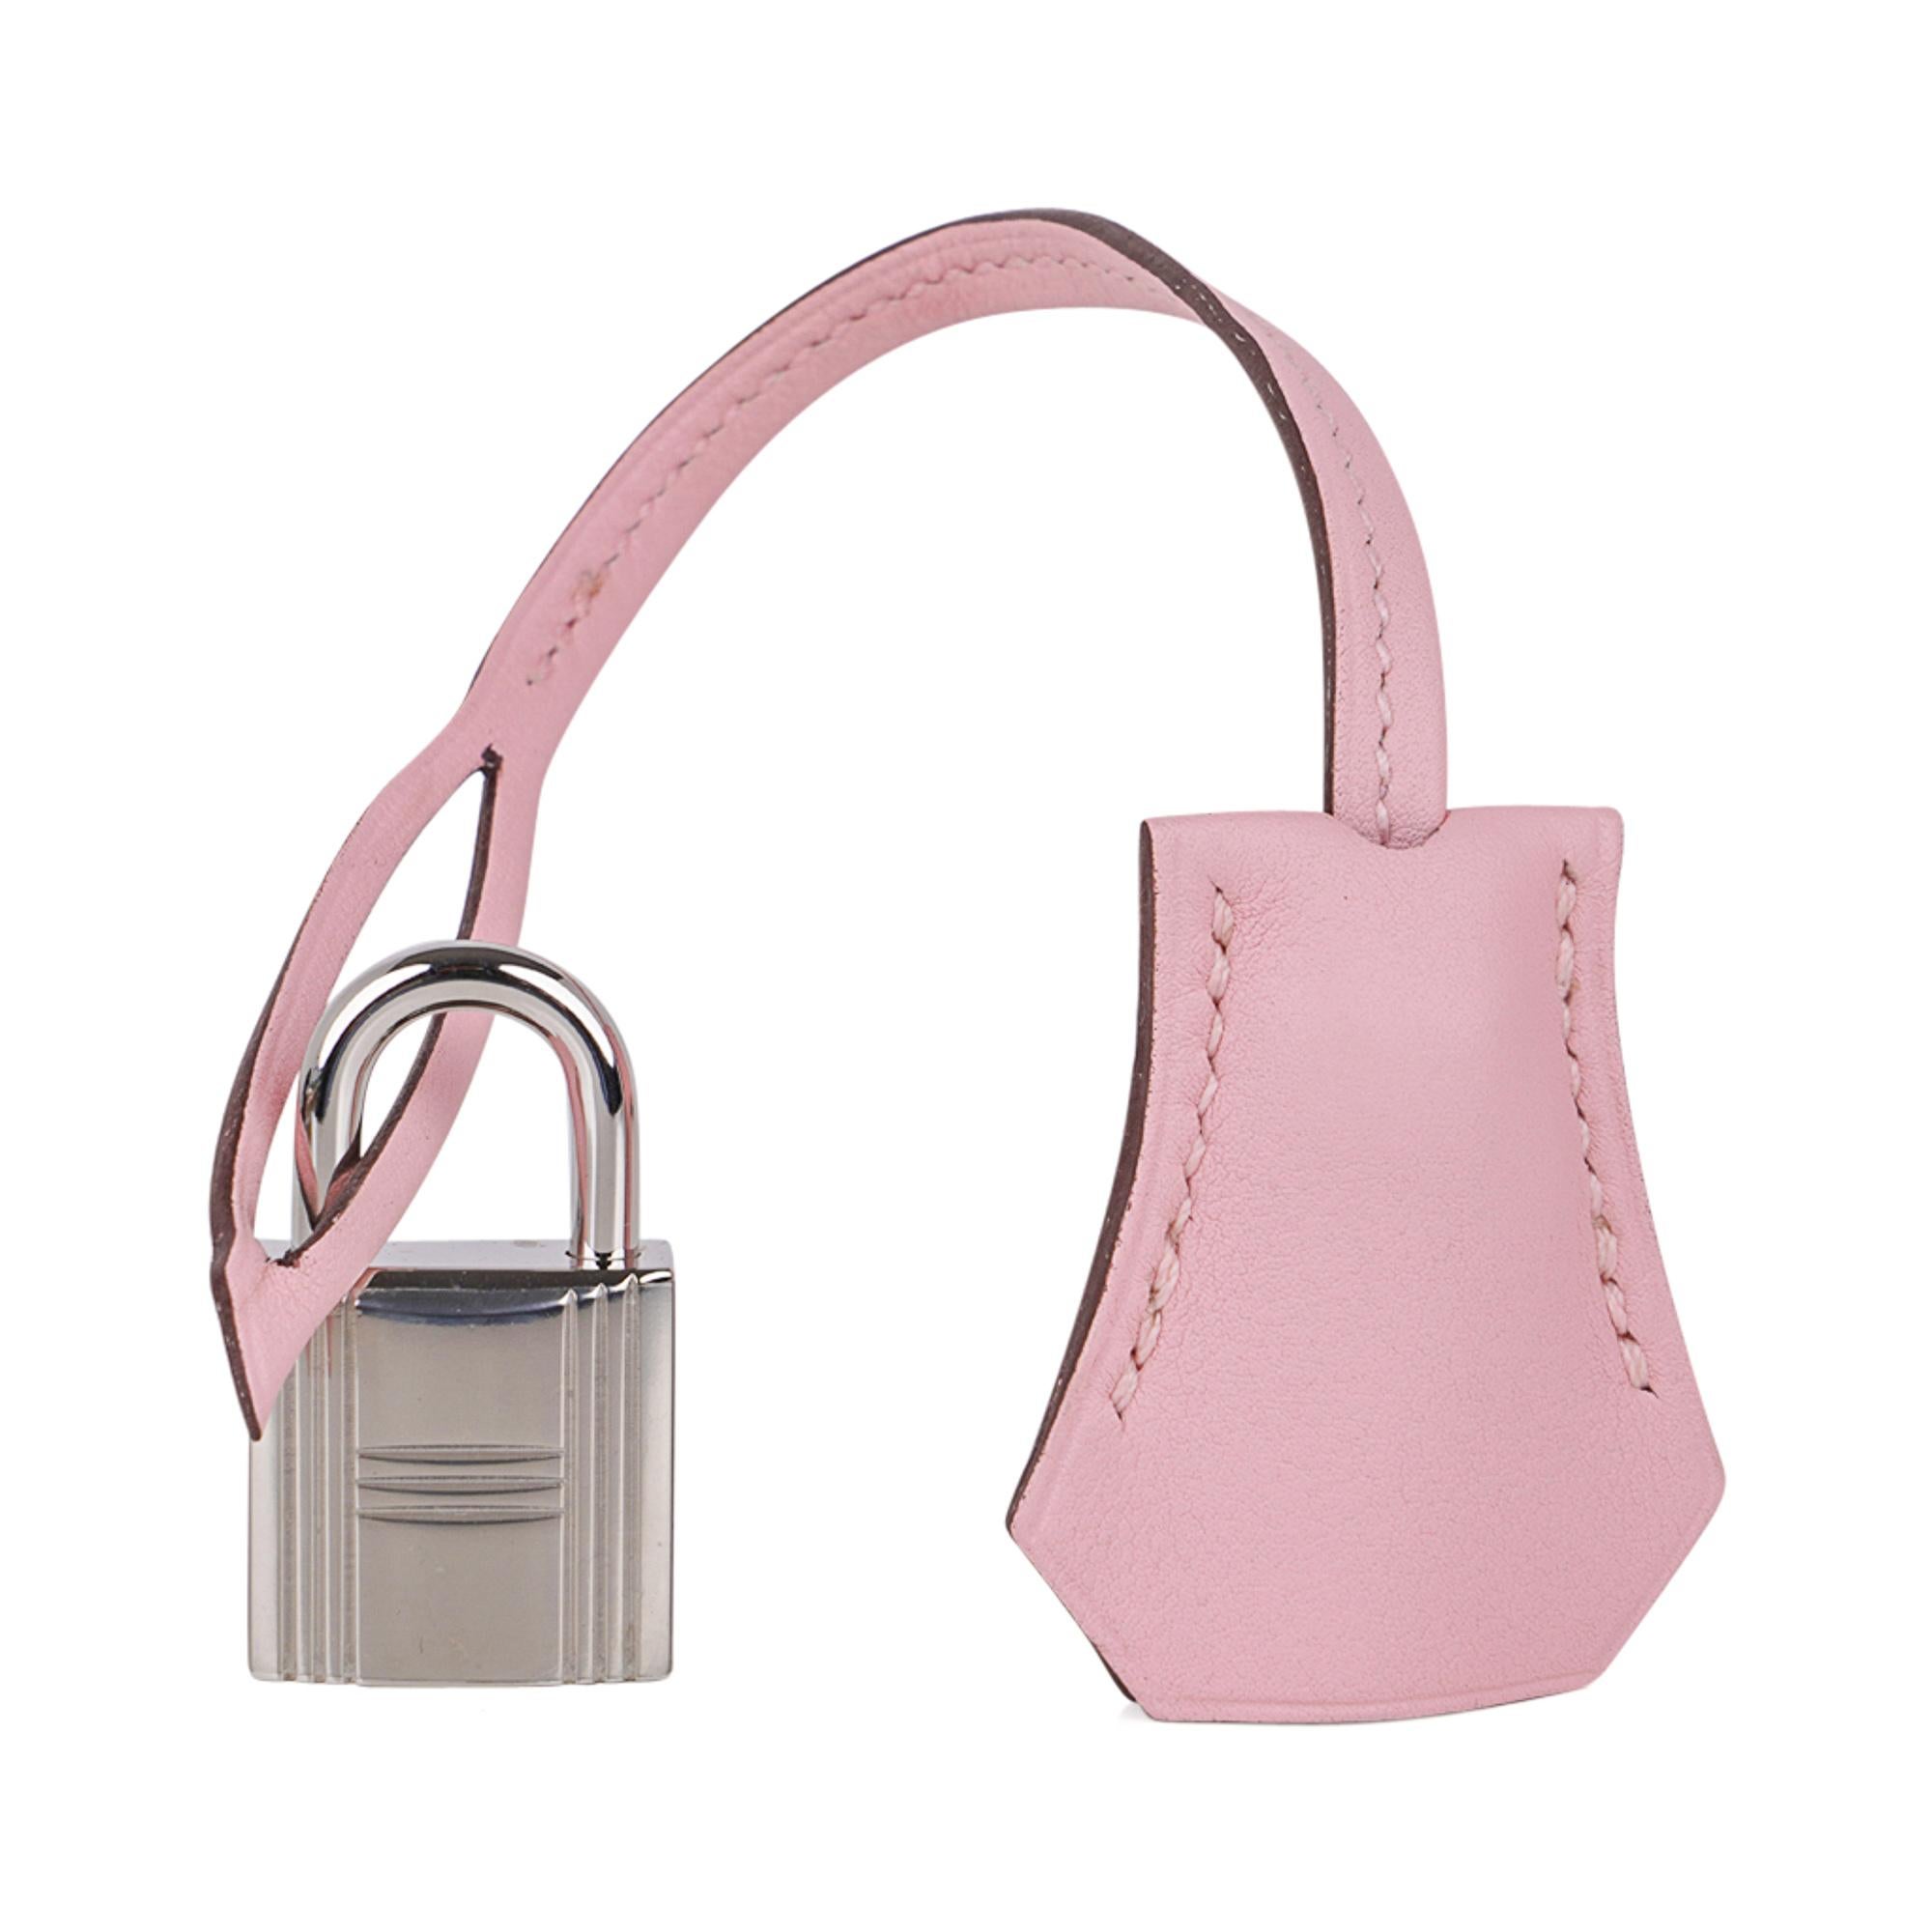 Mightychic offers an Hermes Birkin 25 bag featured in elusive Rose Sakura.
Gorgeous cherry blossom pink in swift leather. 
Soft with palladium hardware.
NEW or NEVER WORN  
Comes with the lock and keys in the clochette, signature Hermes box, sleeper